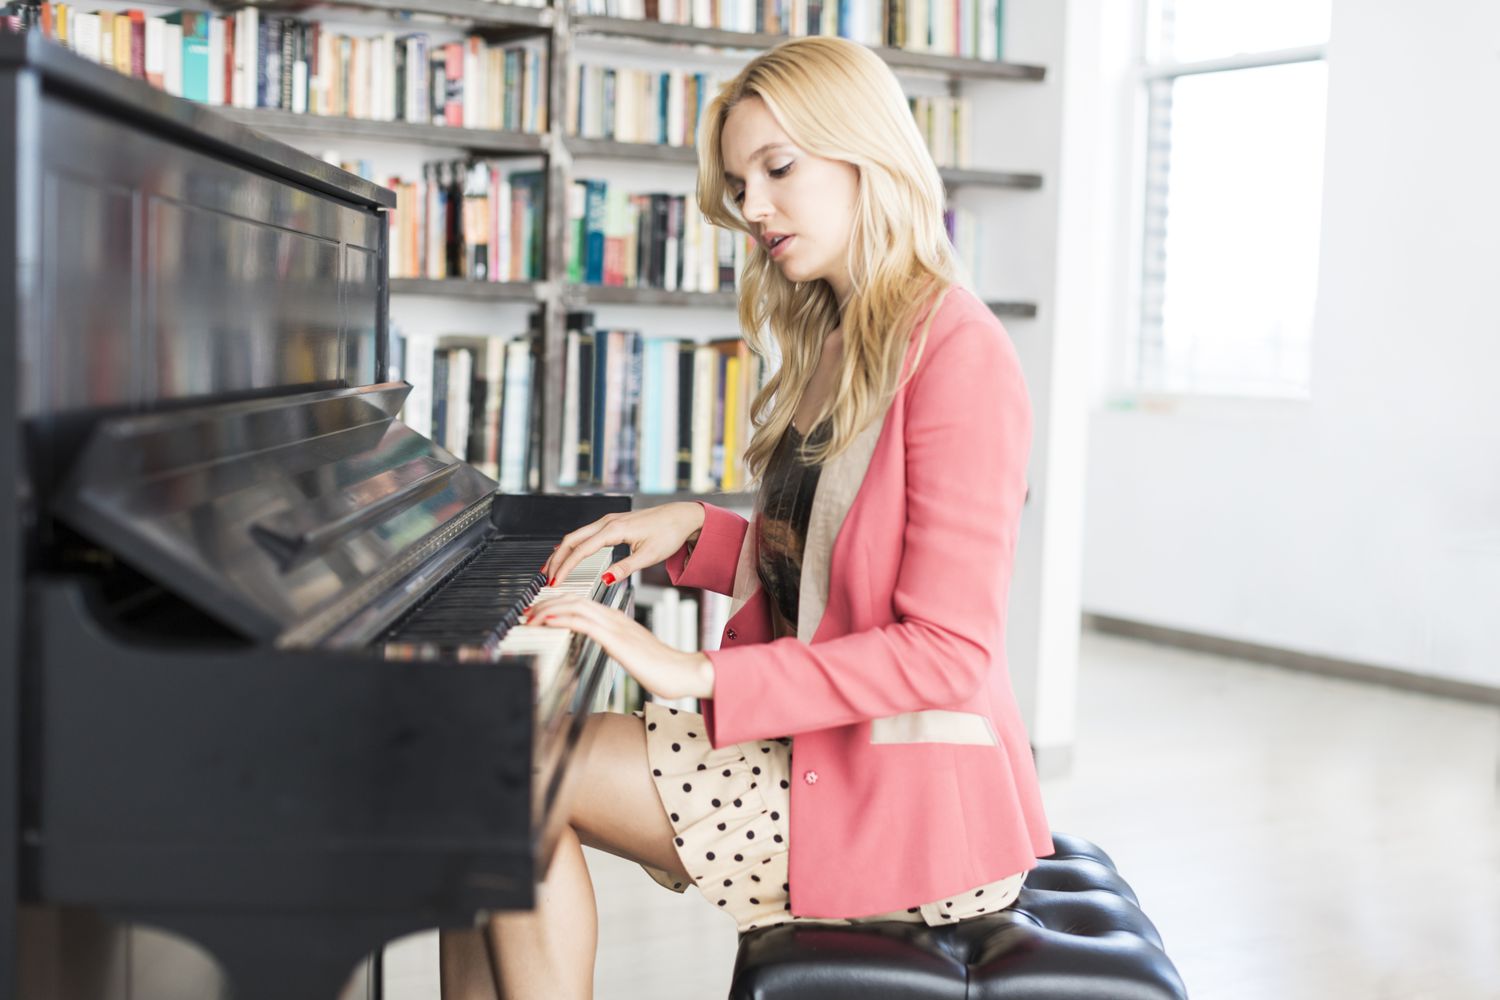 Blonde hair girl wears pink coat and playing piano